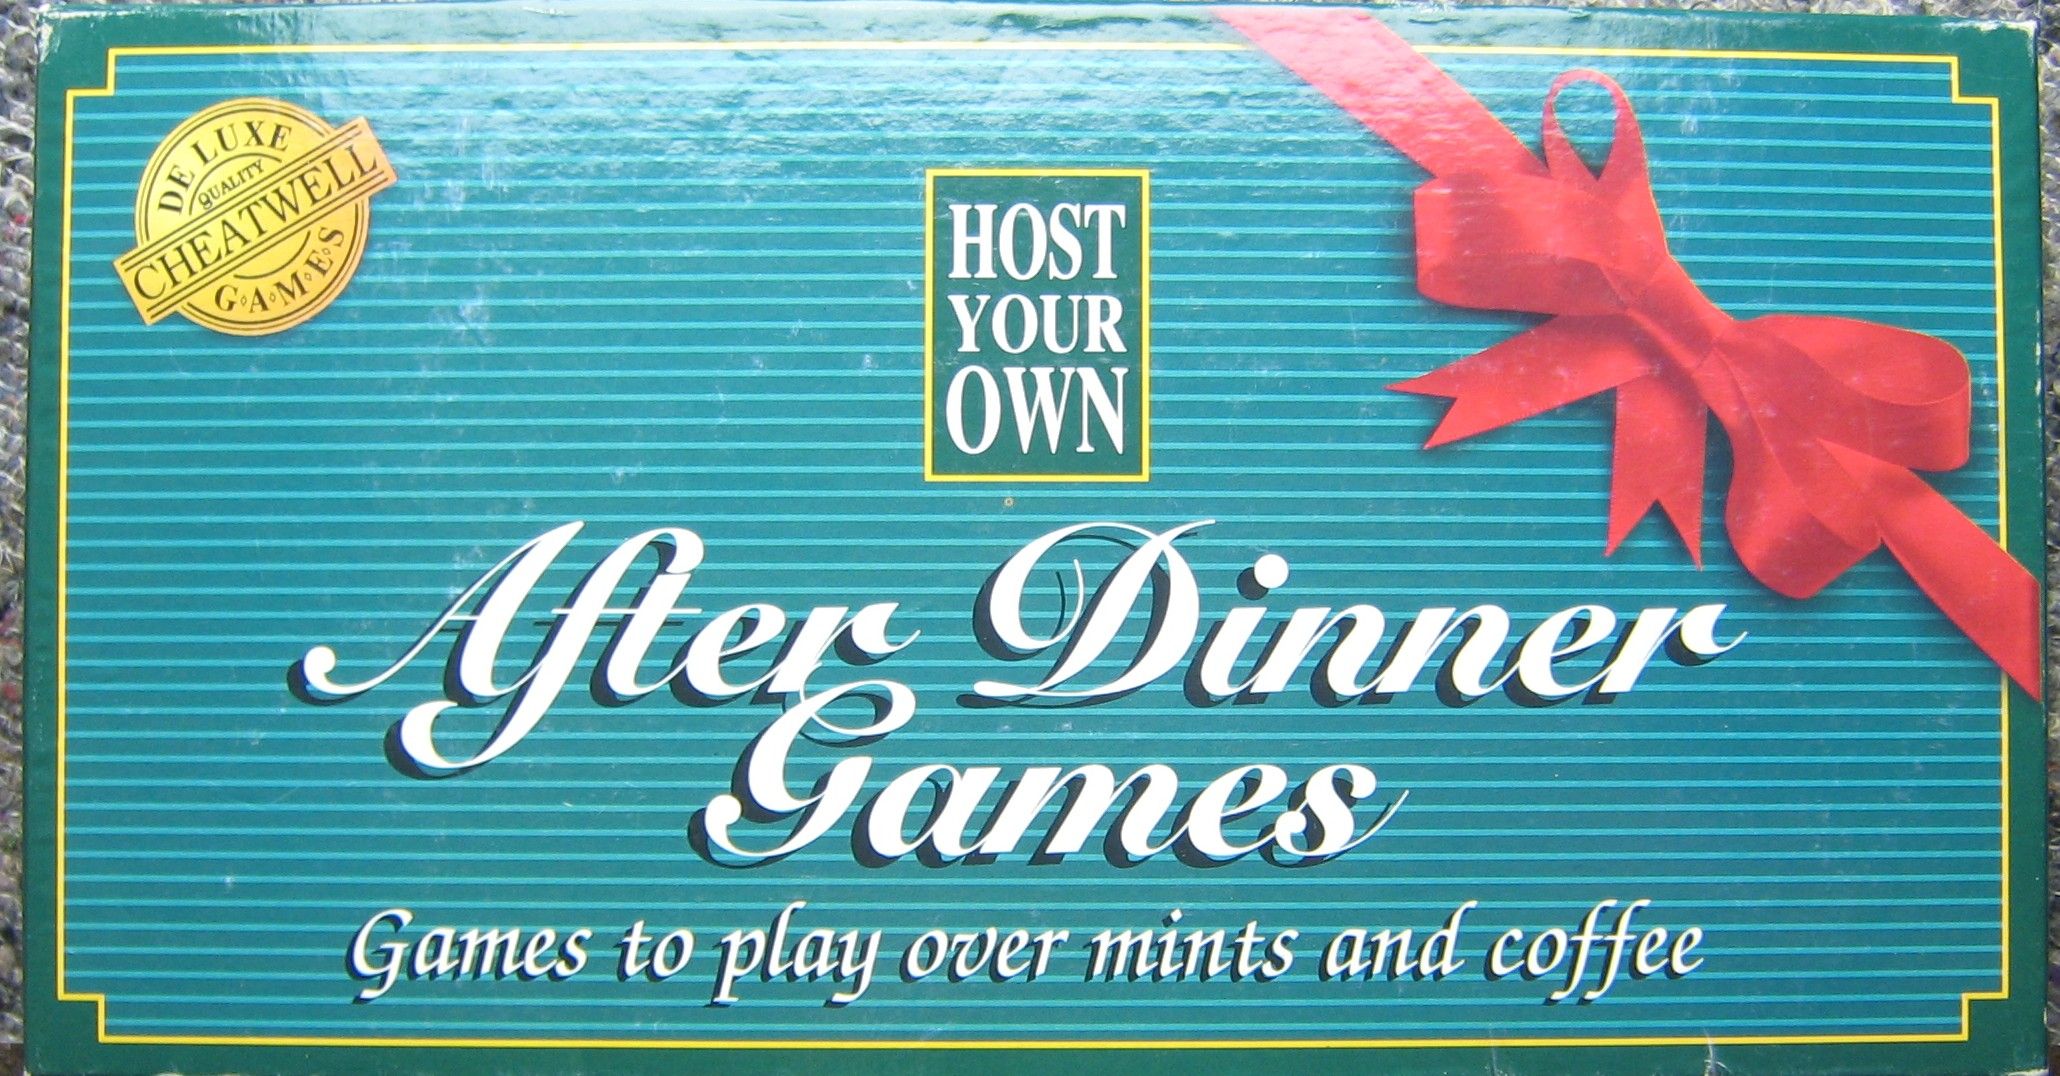 Host Your Own: After Dinner Games